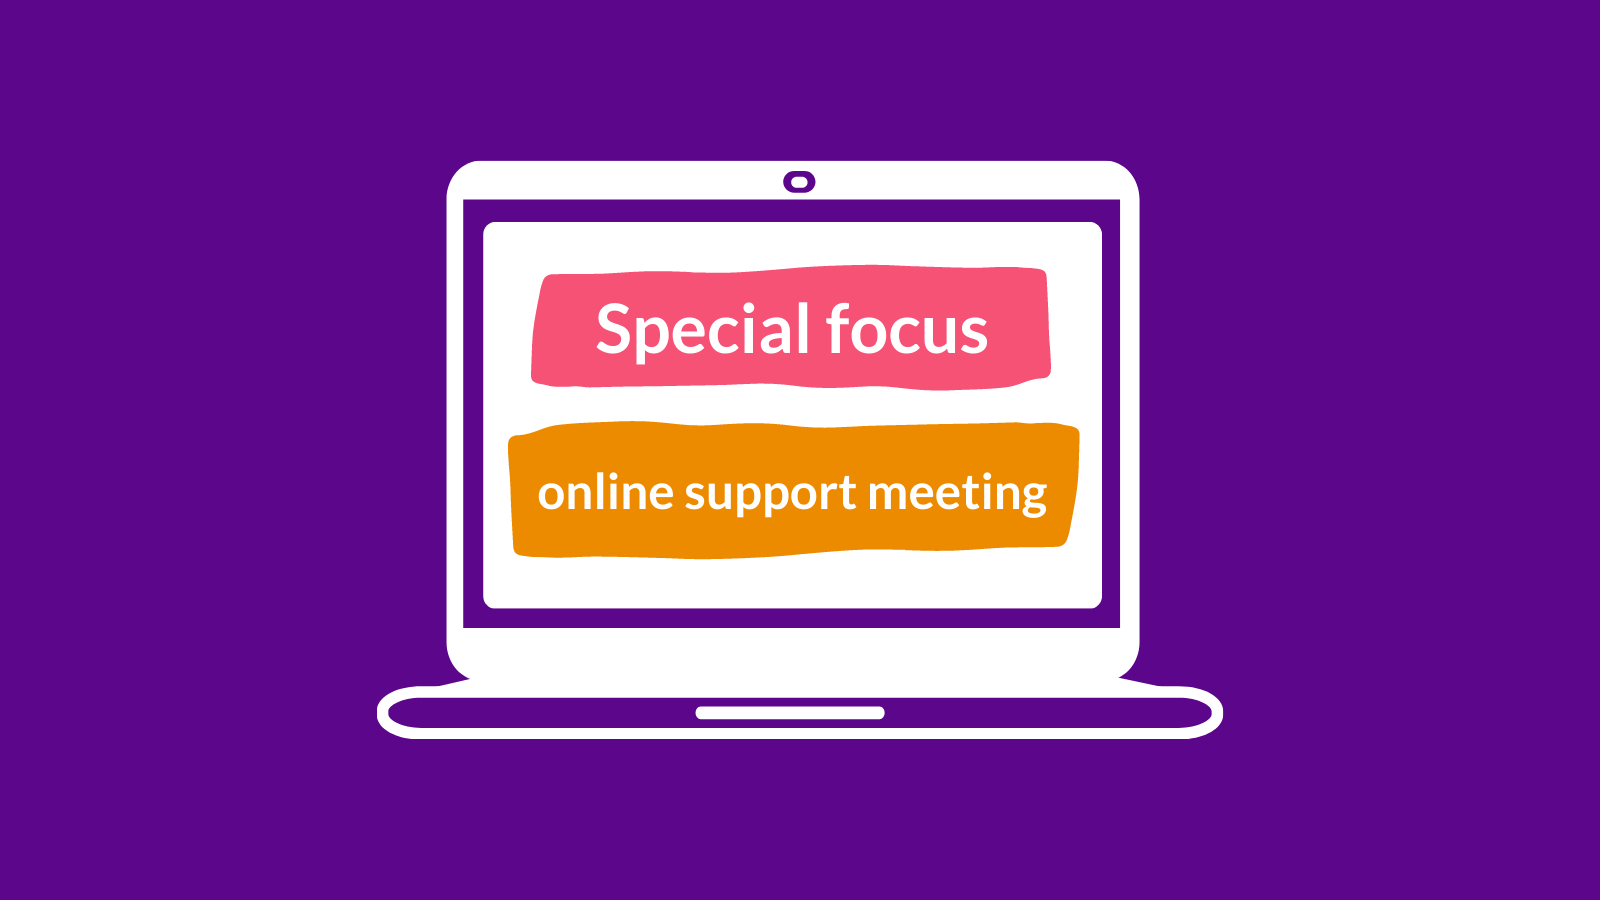 Image of laptop screen with 'Special focus online support meeting' on it